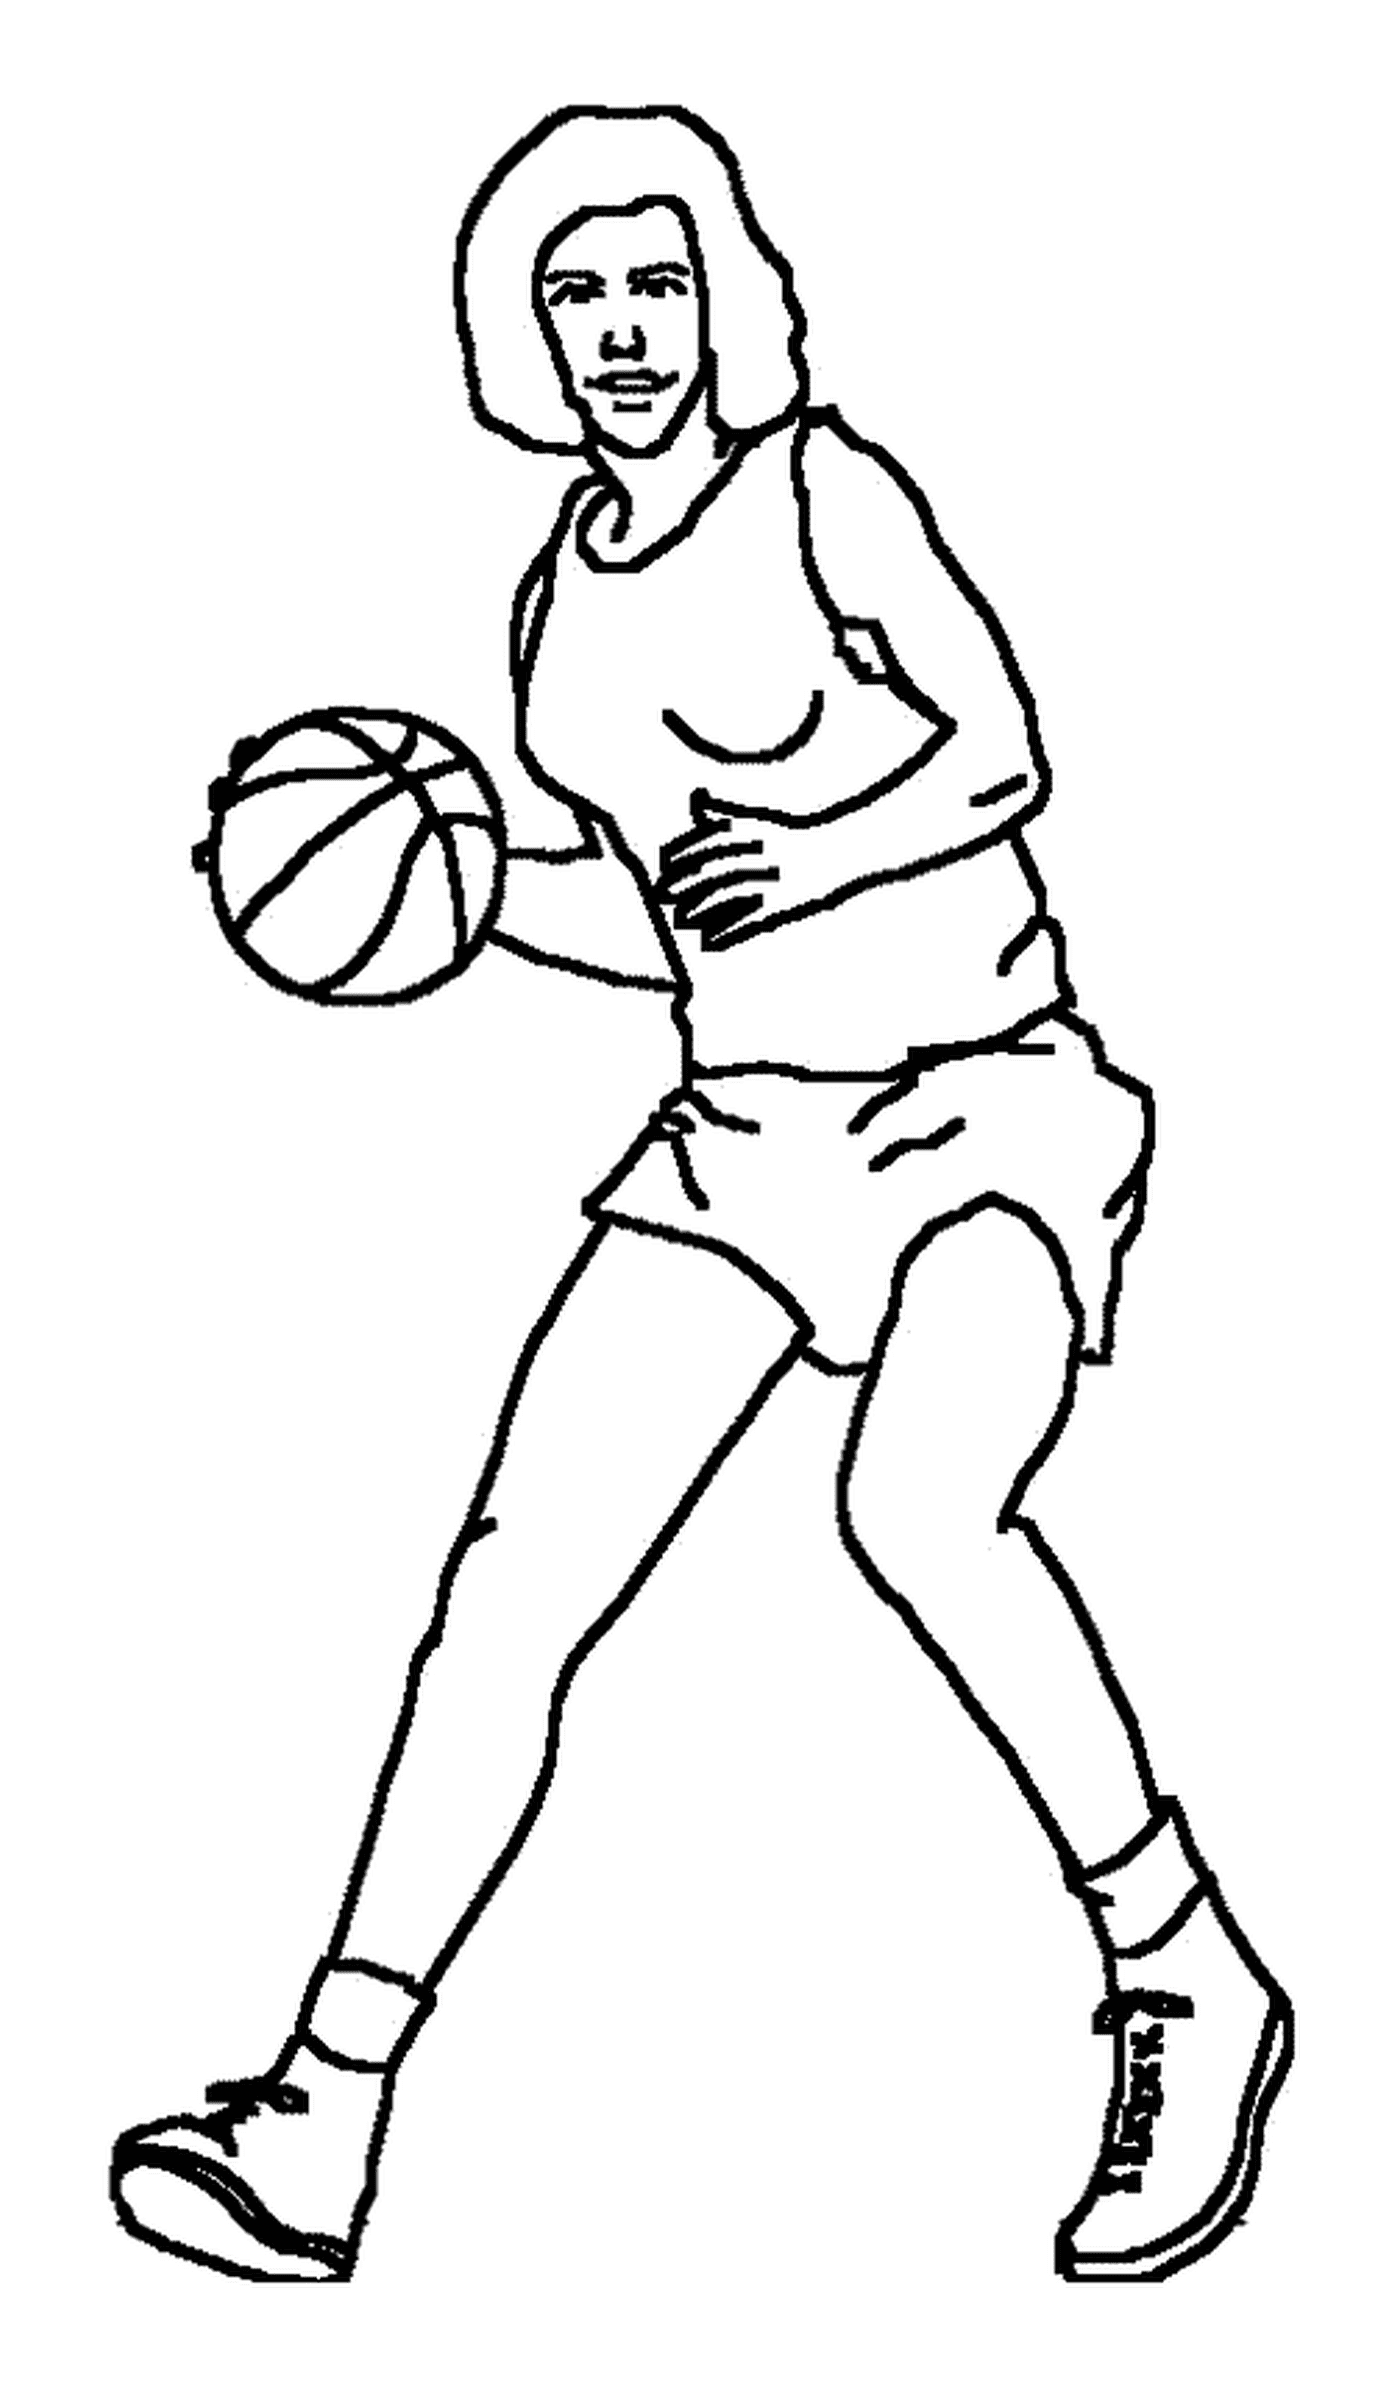  A basketball player with a ball 